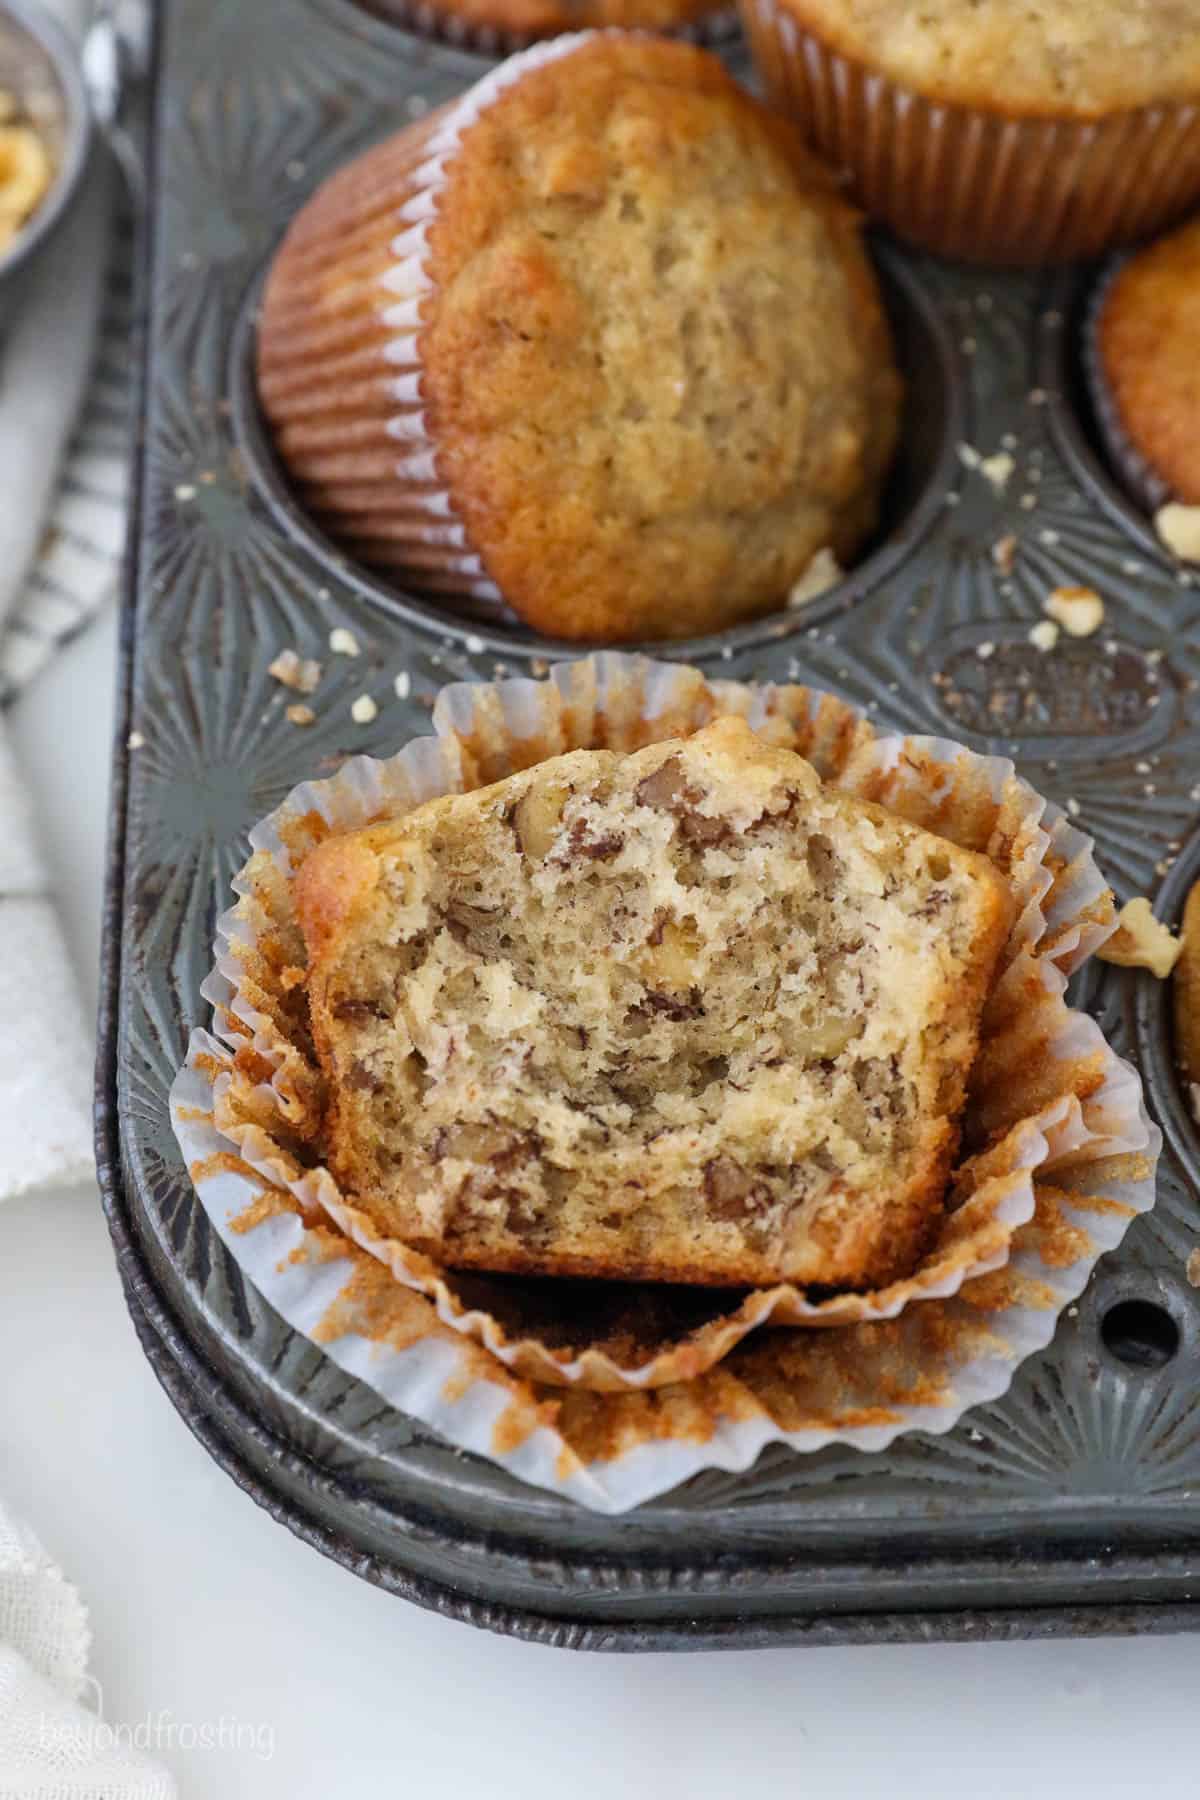 A half-eaten muffin sitting on top of two opened liners